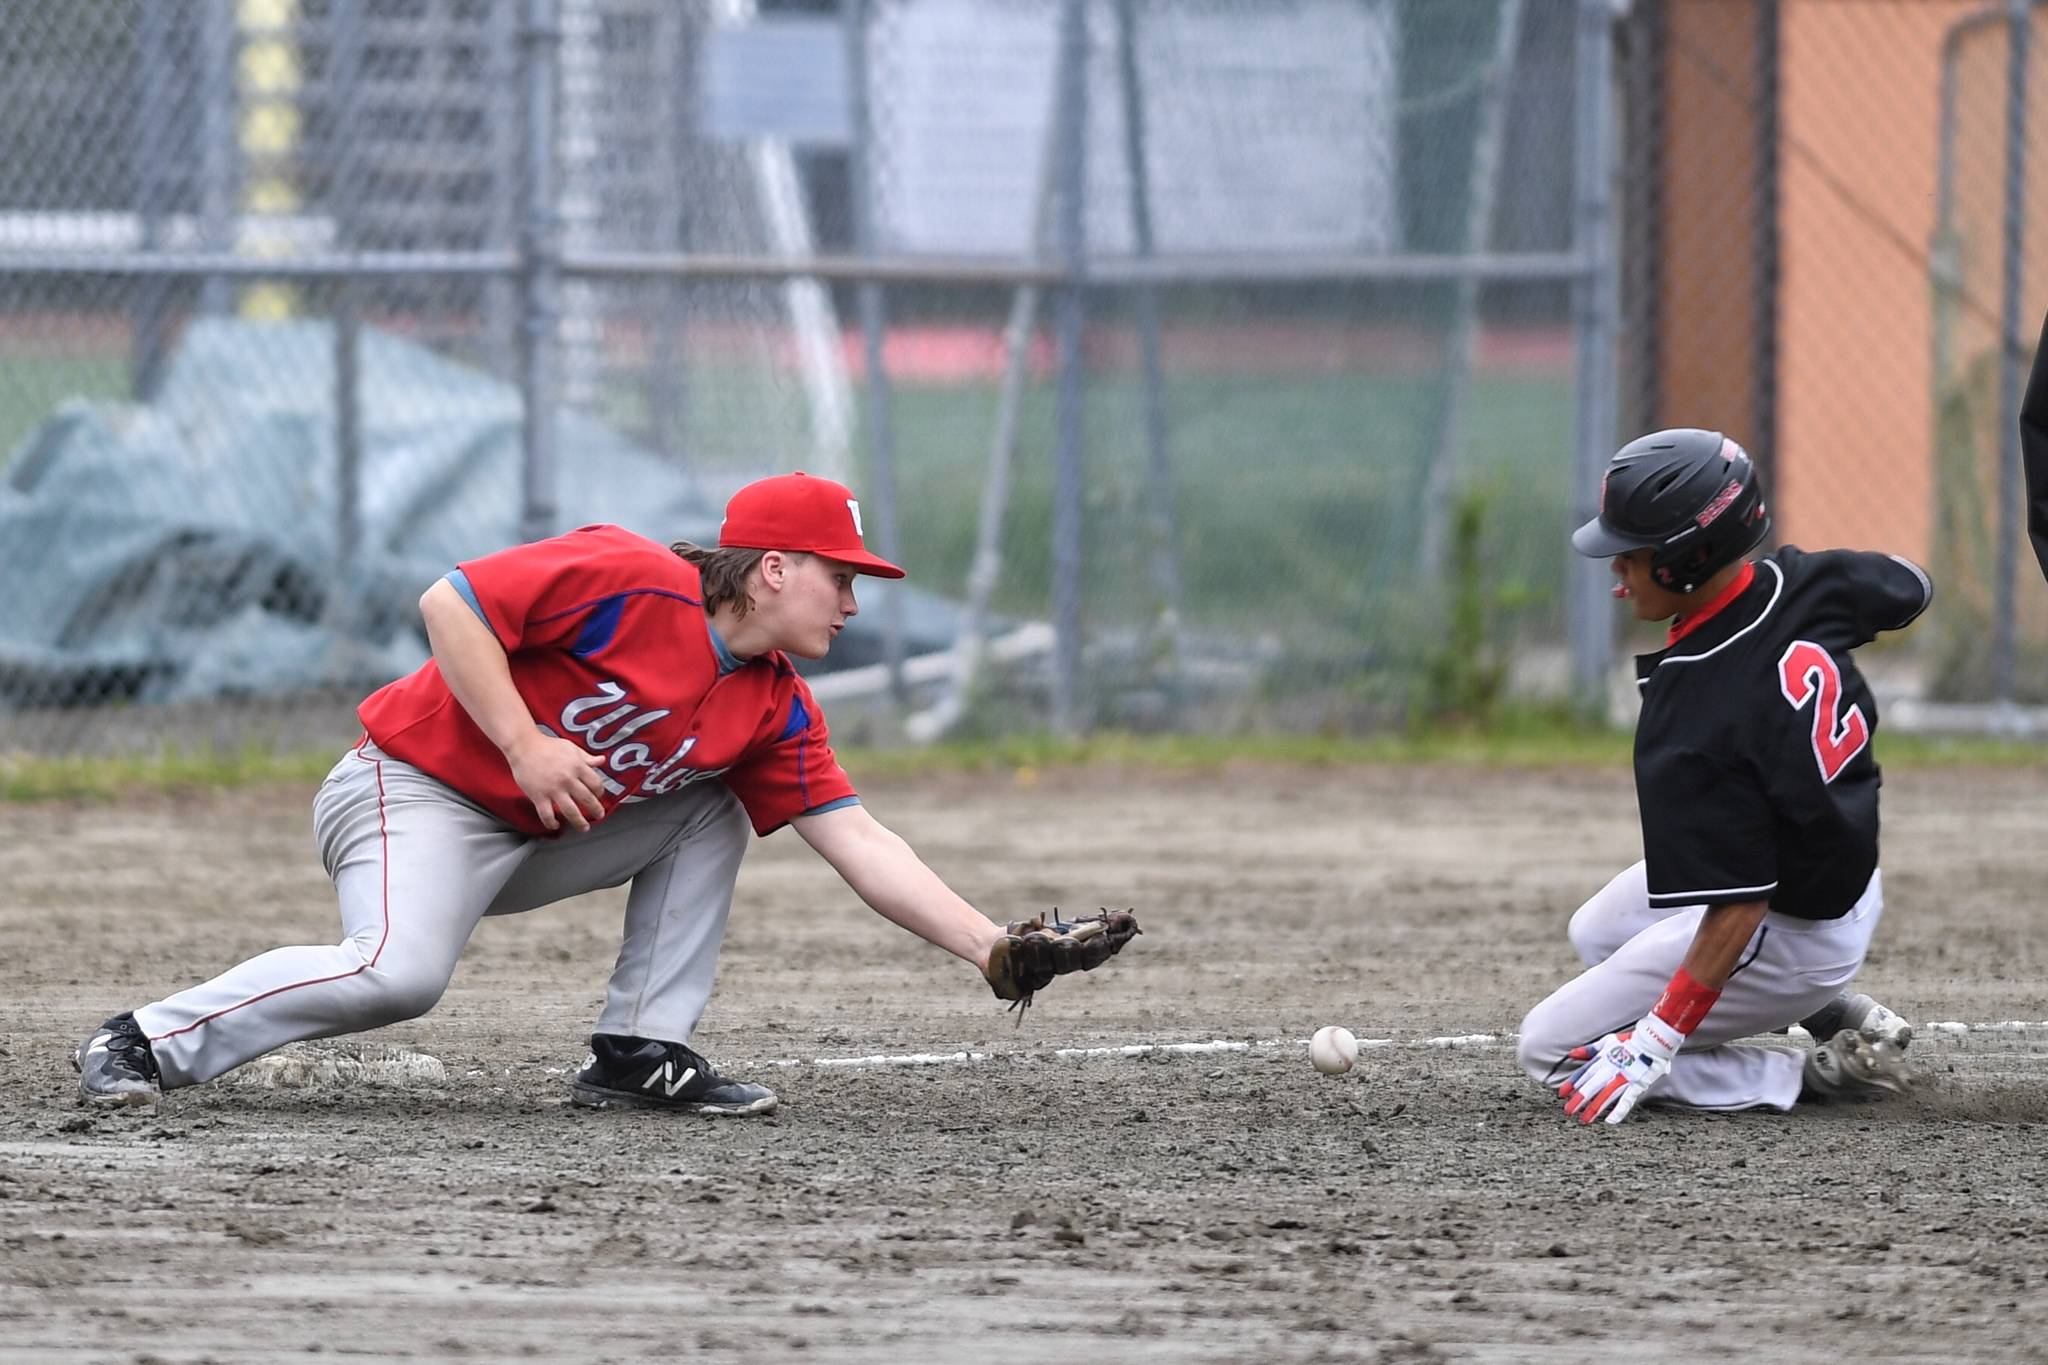 Juneau-Douglas’ Luis Mojica, right, slides safely into third base as Sitka’s Trevin Carley bobbles the throw during the Region V Baseball Championship at Adair-Kennedy Memorial Park on Thursday, May 23, 2019. (Michael Penn | Juneau Empire)